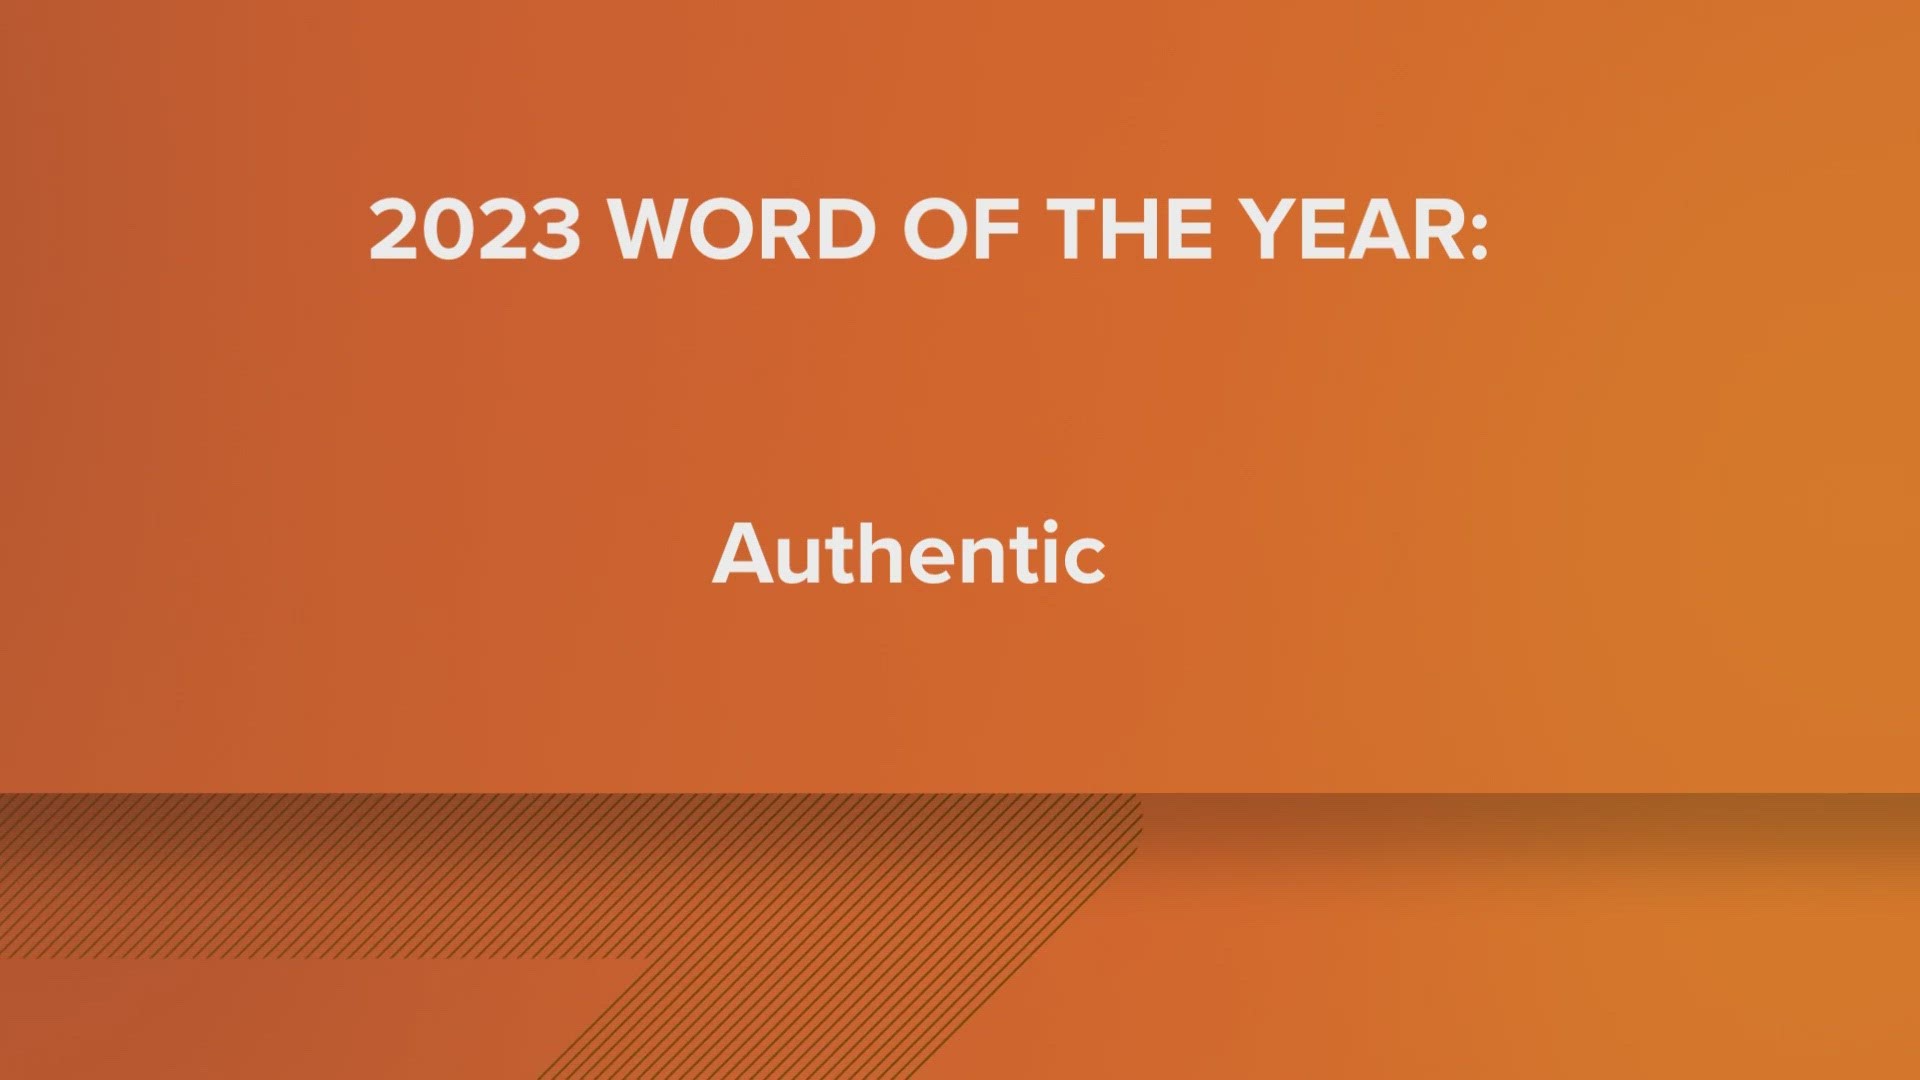 Here's MerriamWebster's word of the year for 2023